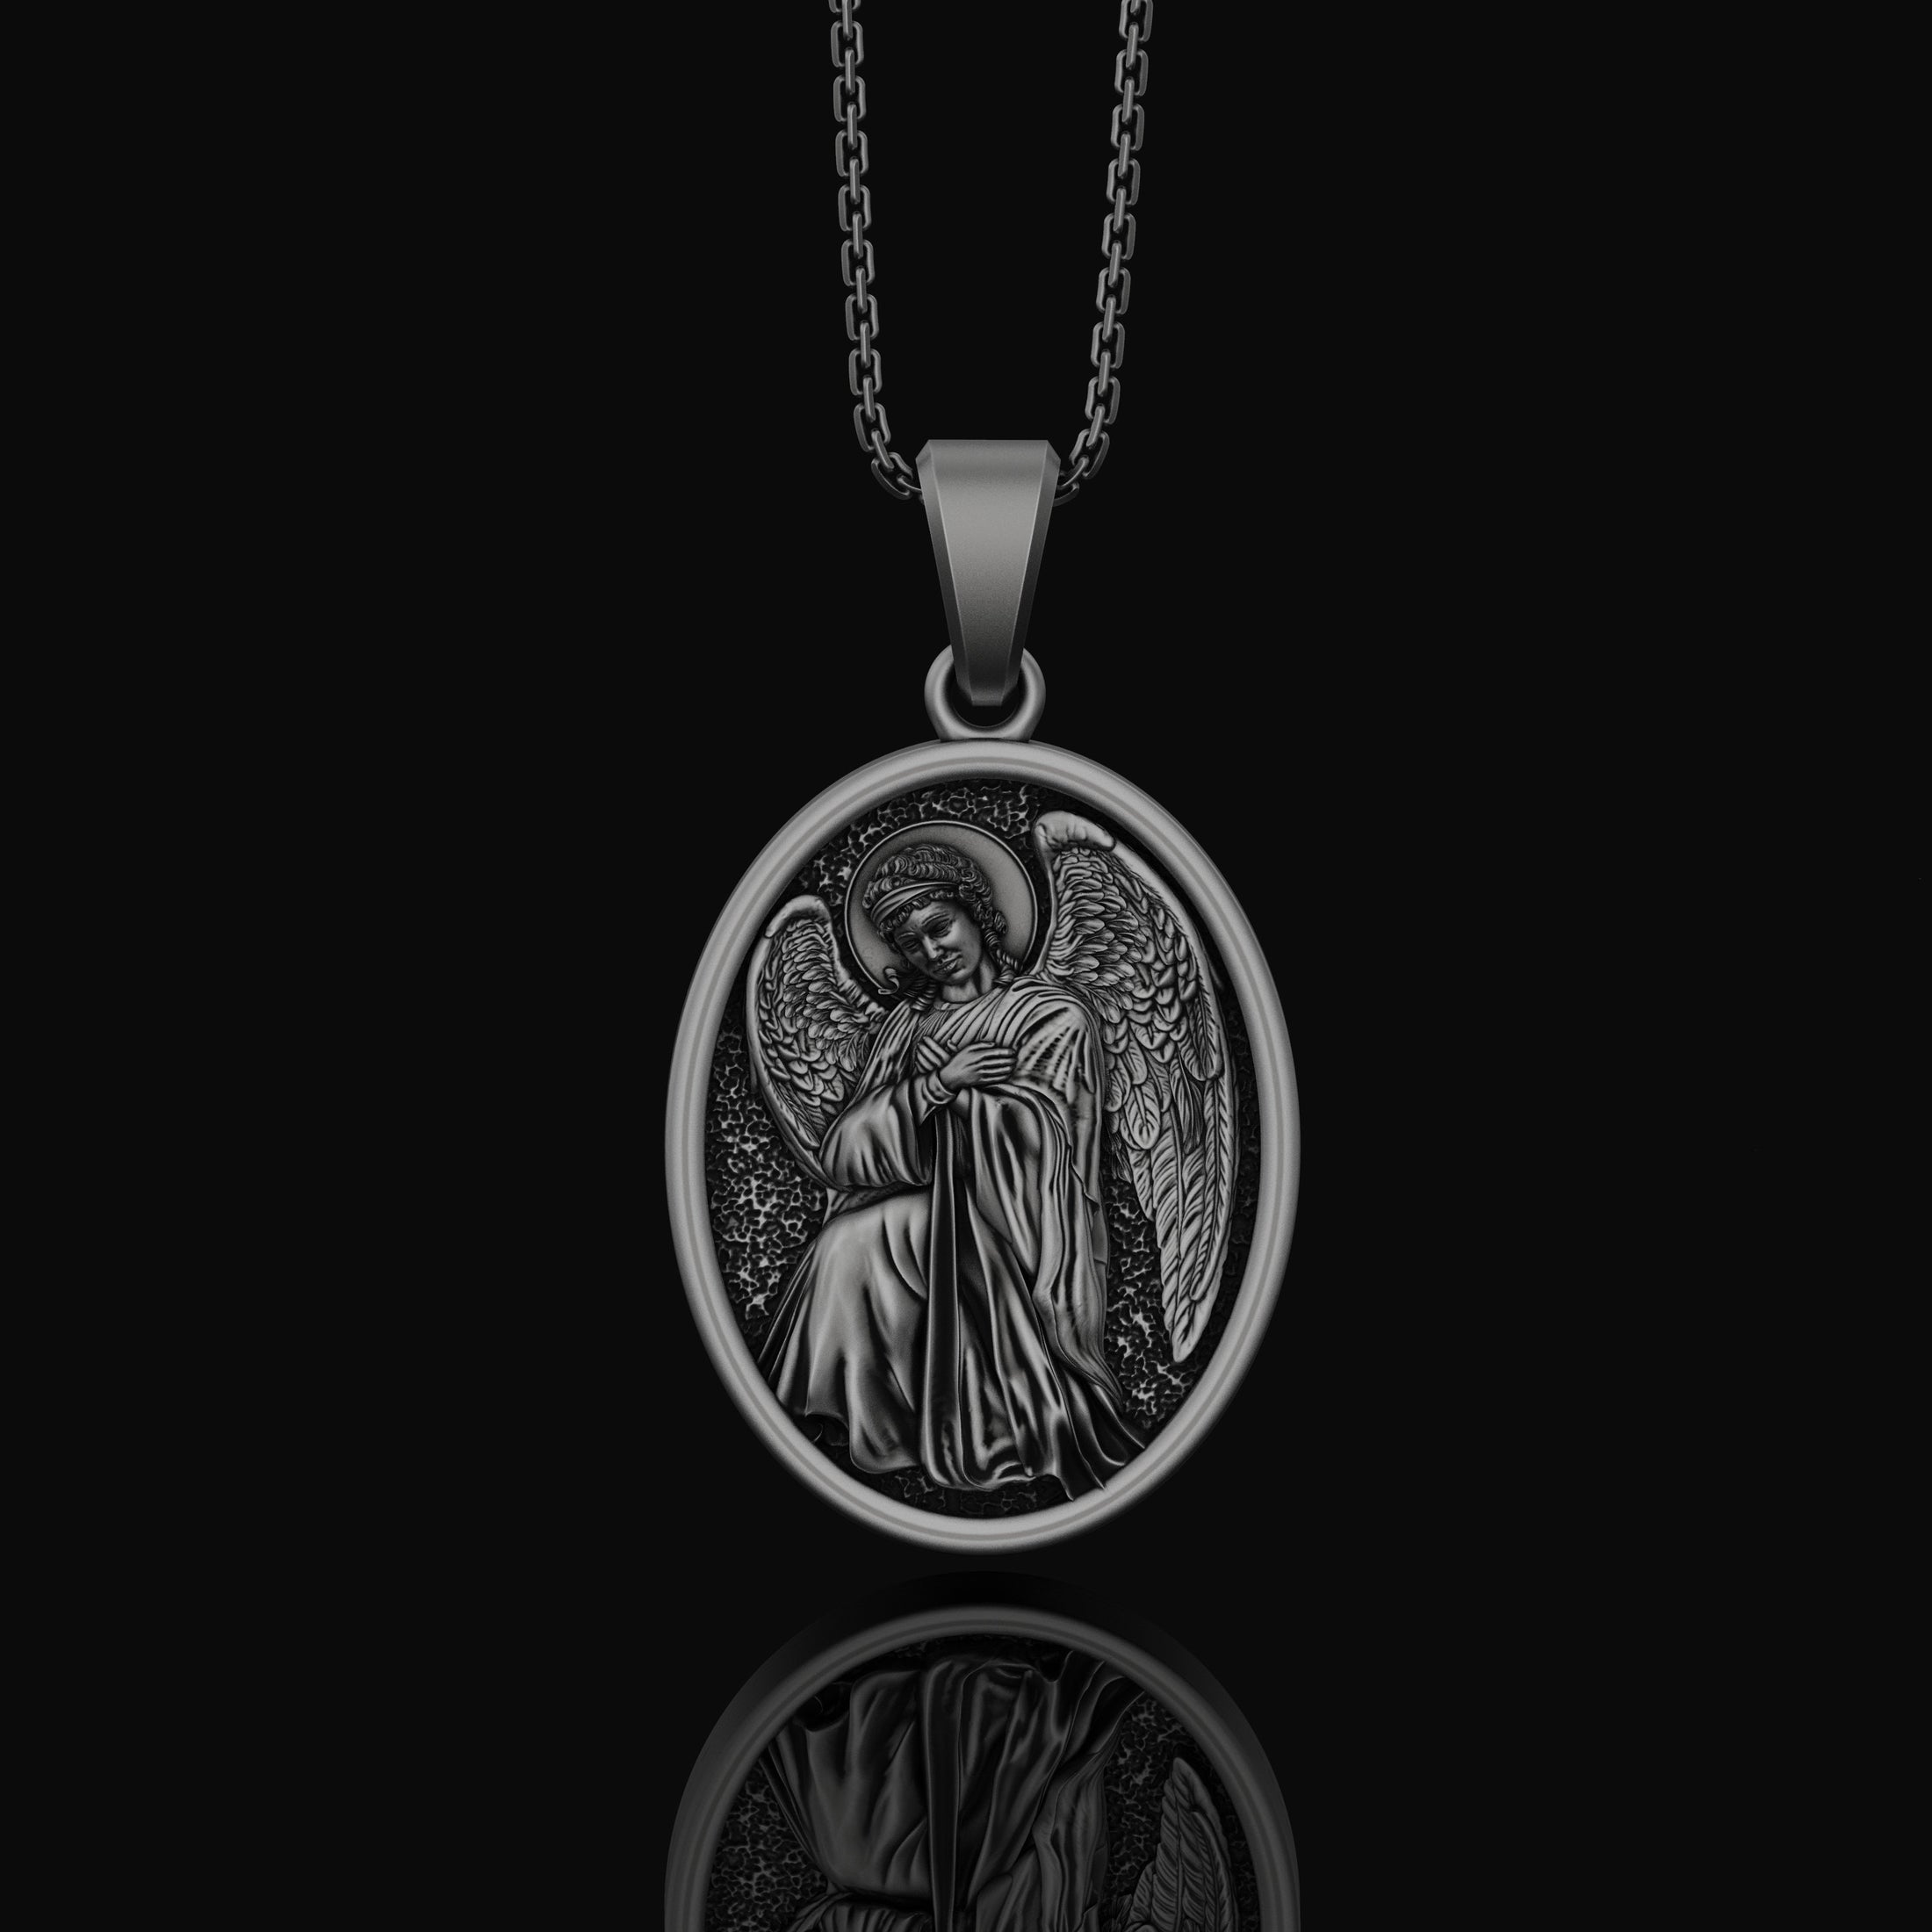 Silver Archangel Gabriel Pendant - Guardian Angel Gabriel Necklace, Christian Spiritual Jewelry Gift, Protection Gift, Personalized